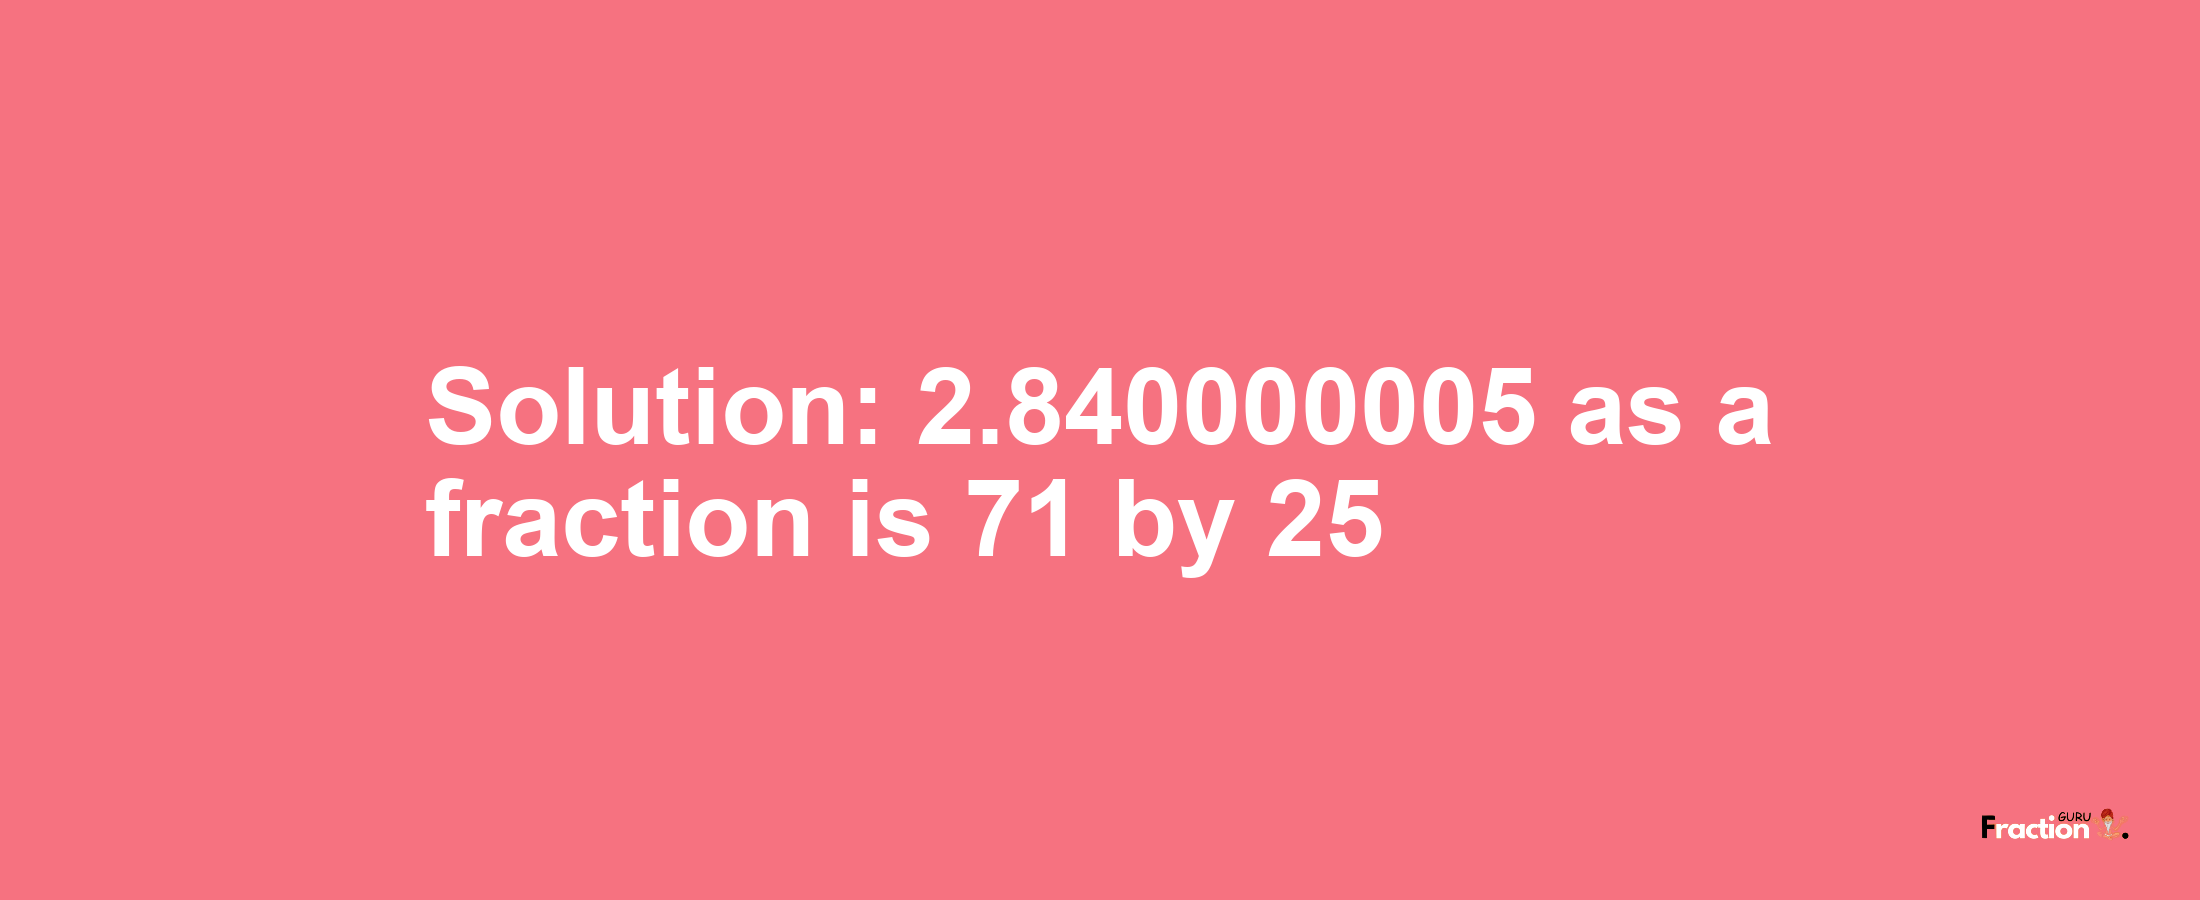 Solution:2.840000005 as a fraction is 71/25